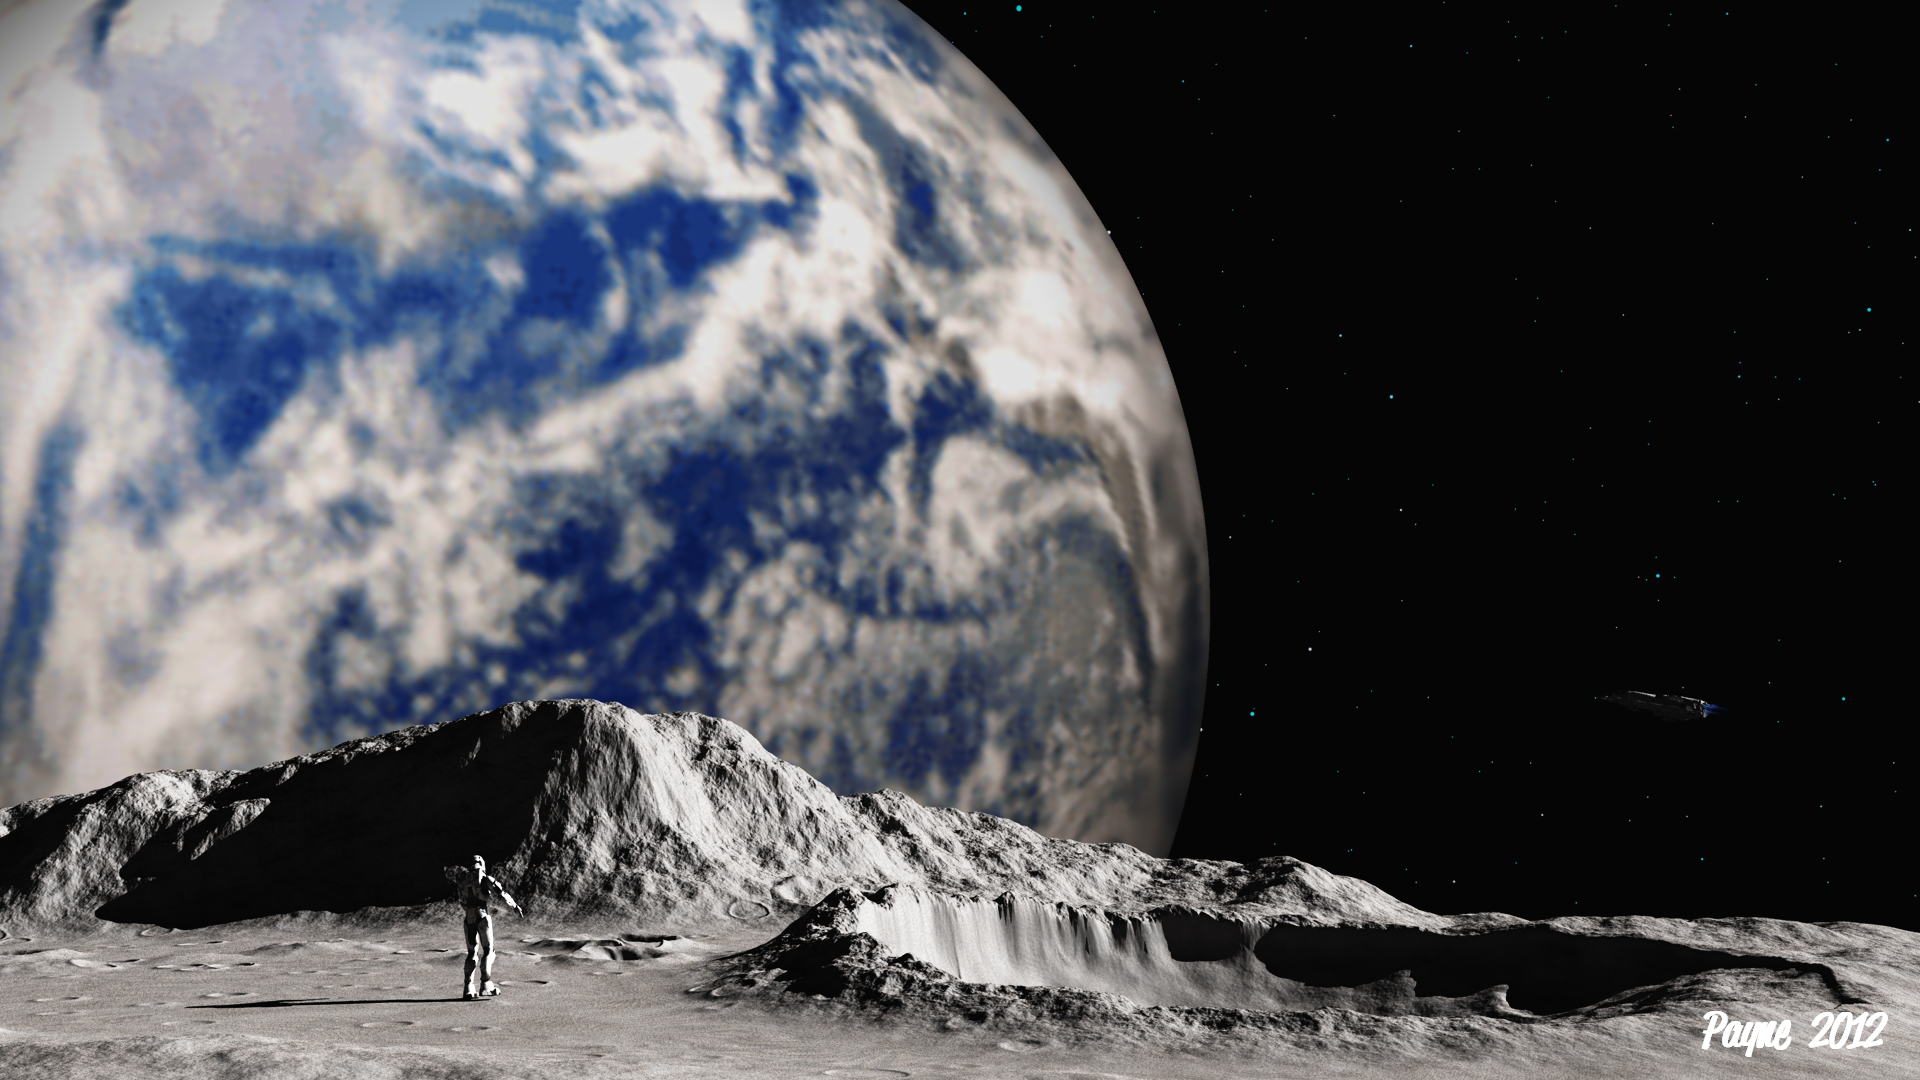 Man On The Moon Backgrounds, Compatible - PC, Mobile, Gadgets| 1920x1080 px